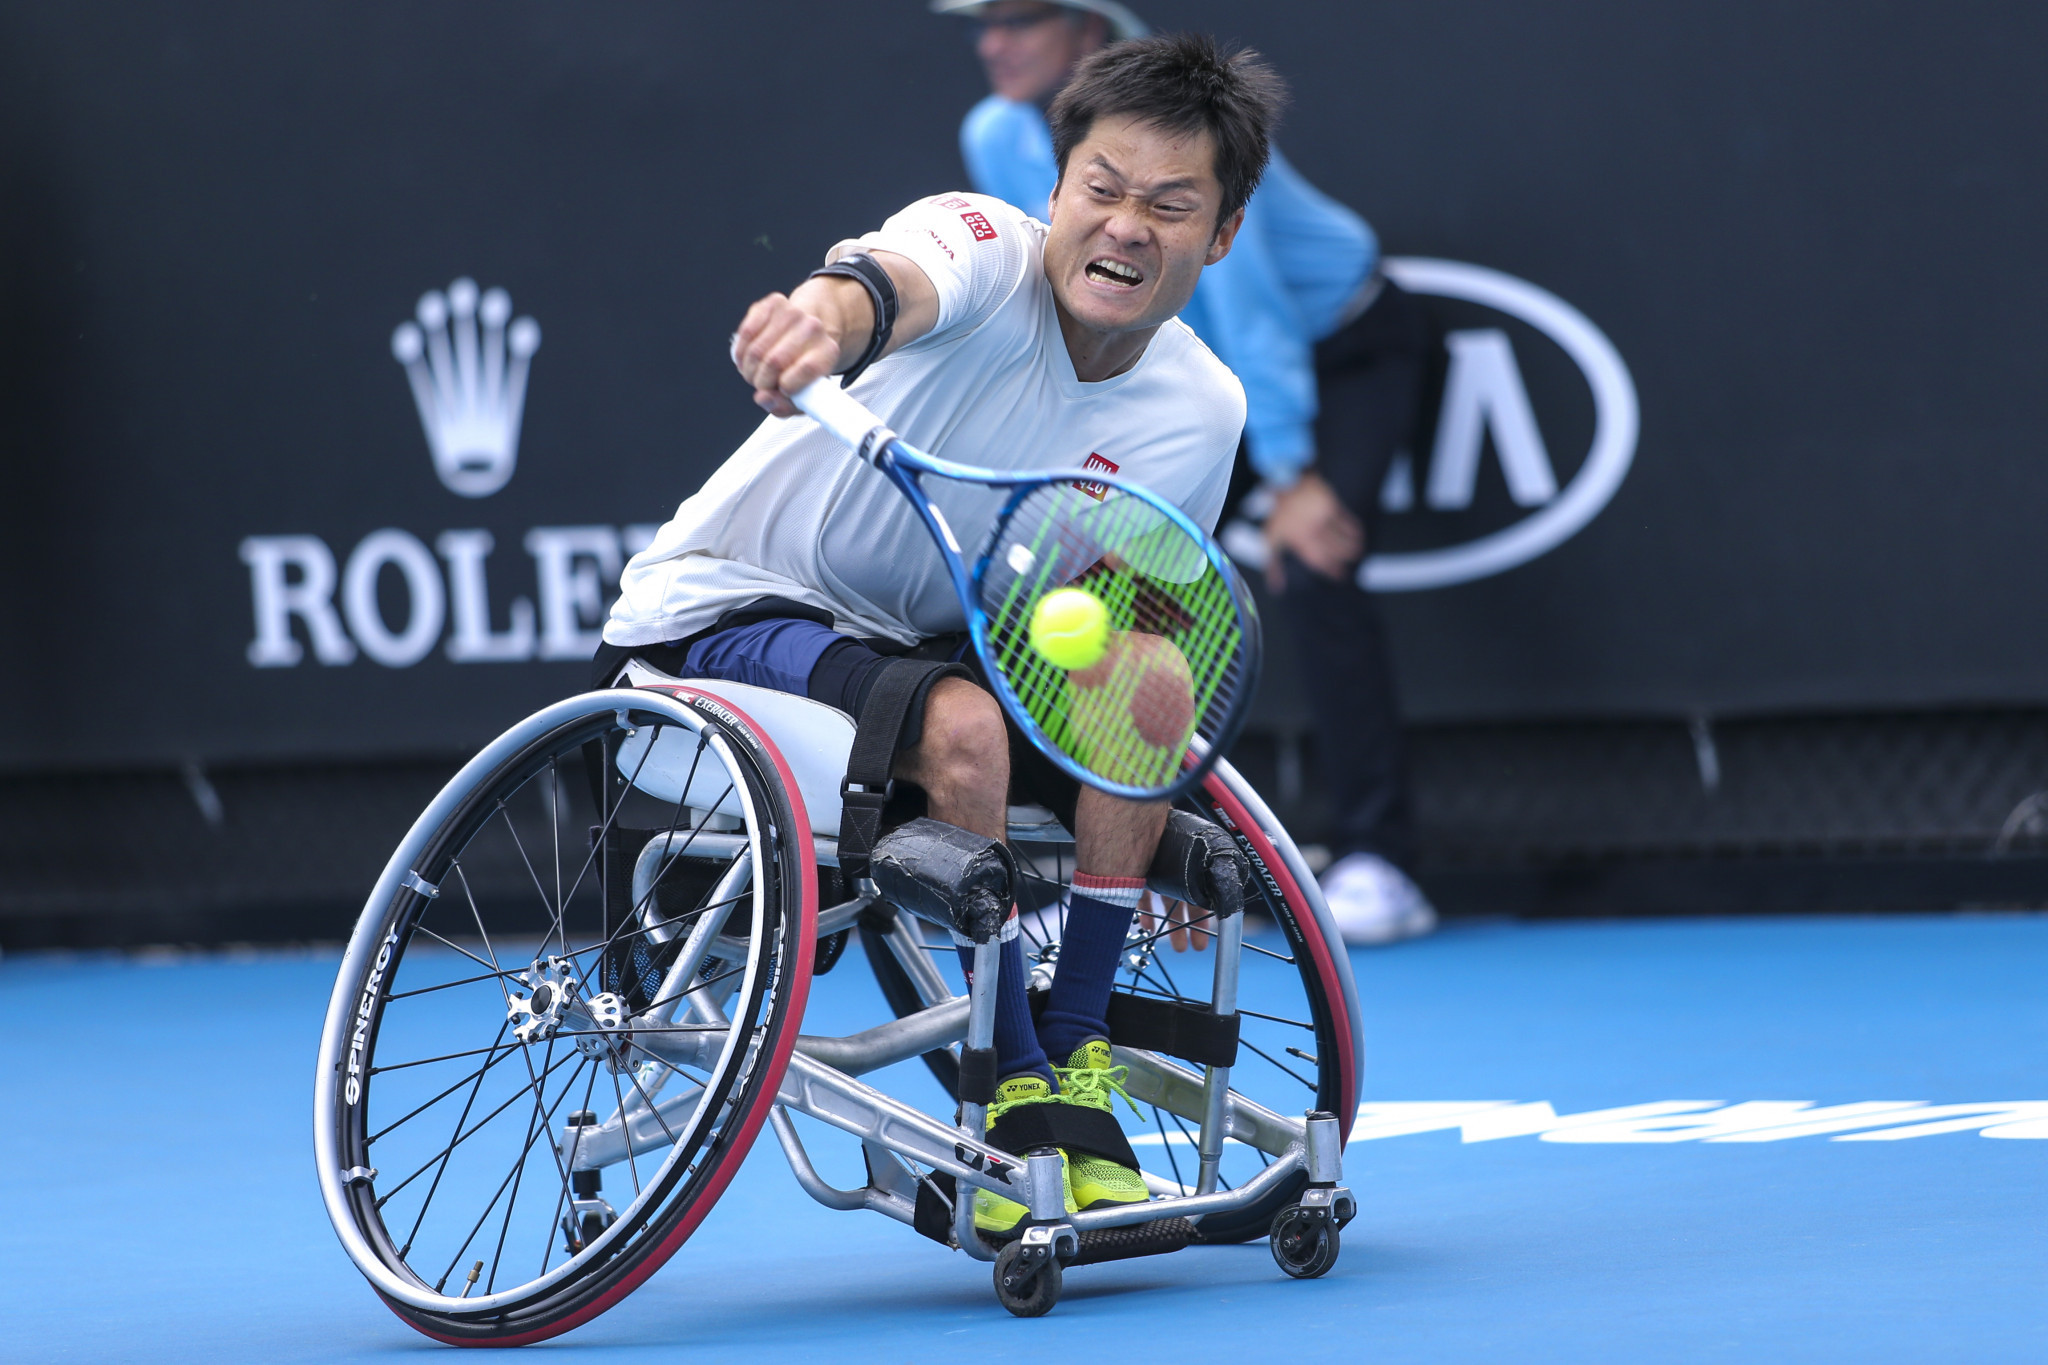 Japan's wheelchair tennis star Shingo Kunieda placed second in the public vote ©Getty Images